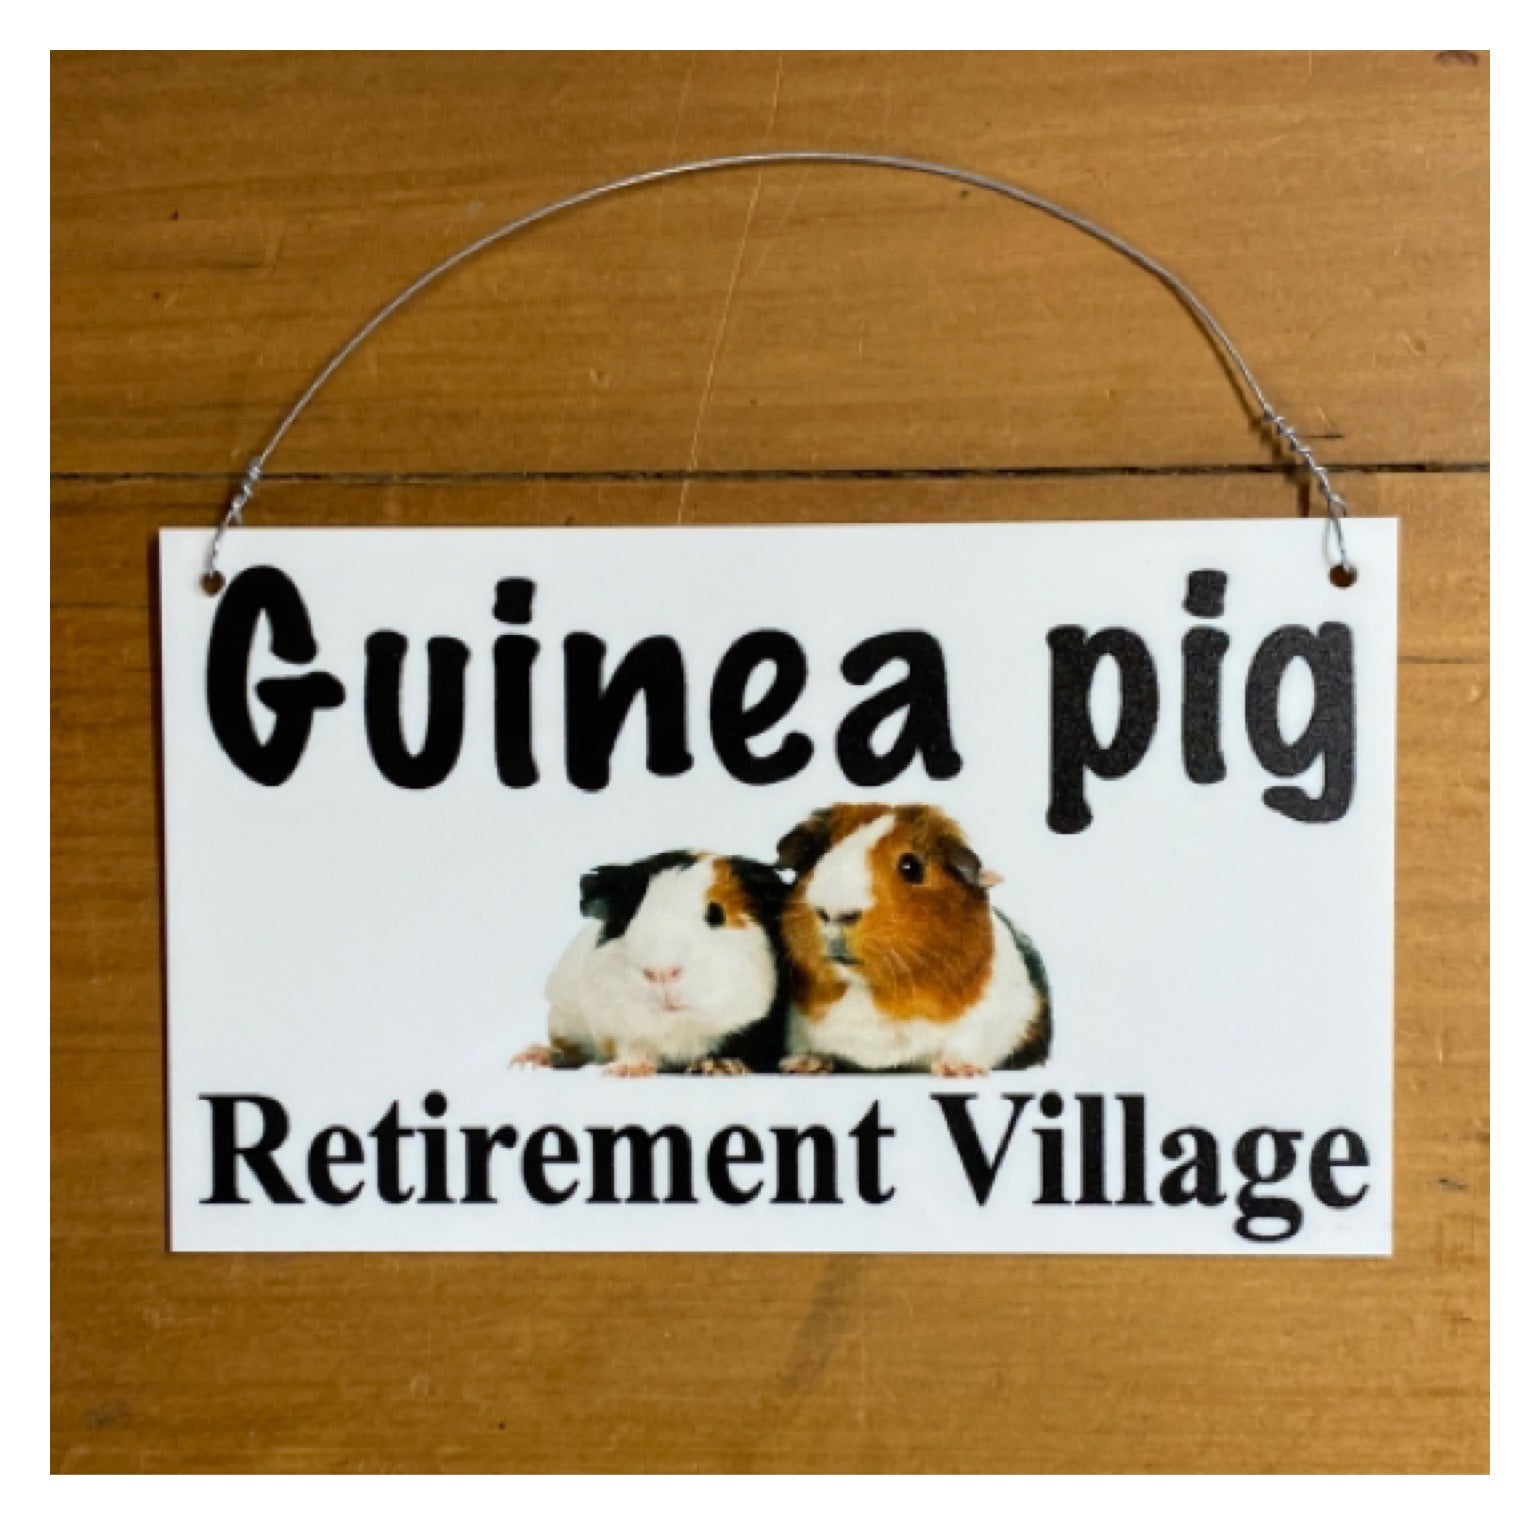 Guinea Pig Hutch House Custom Wording Your Name Sign - The Renmy Store Homewares & Gifts 